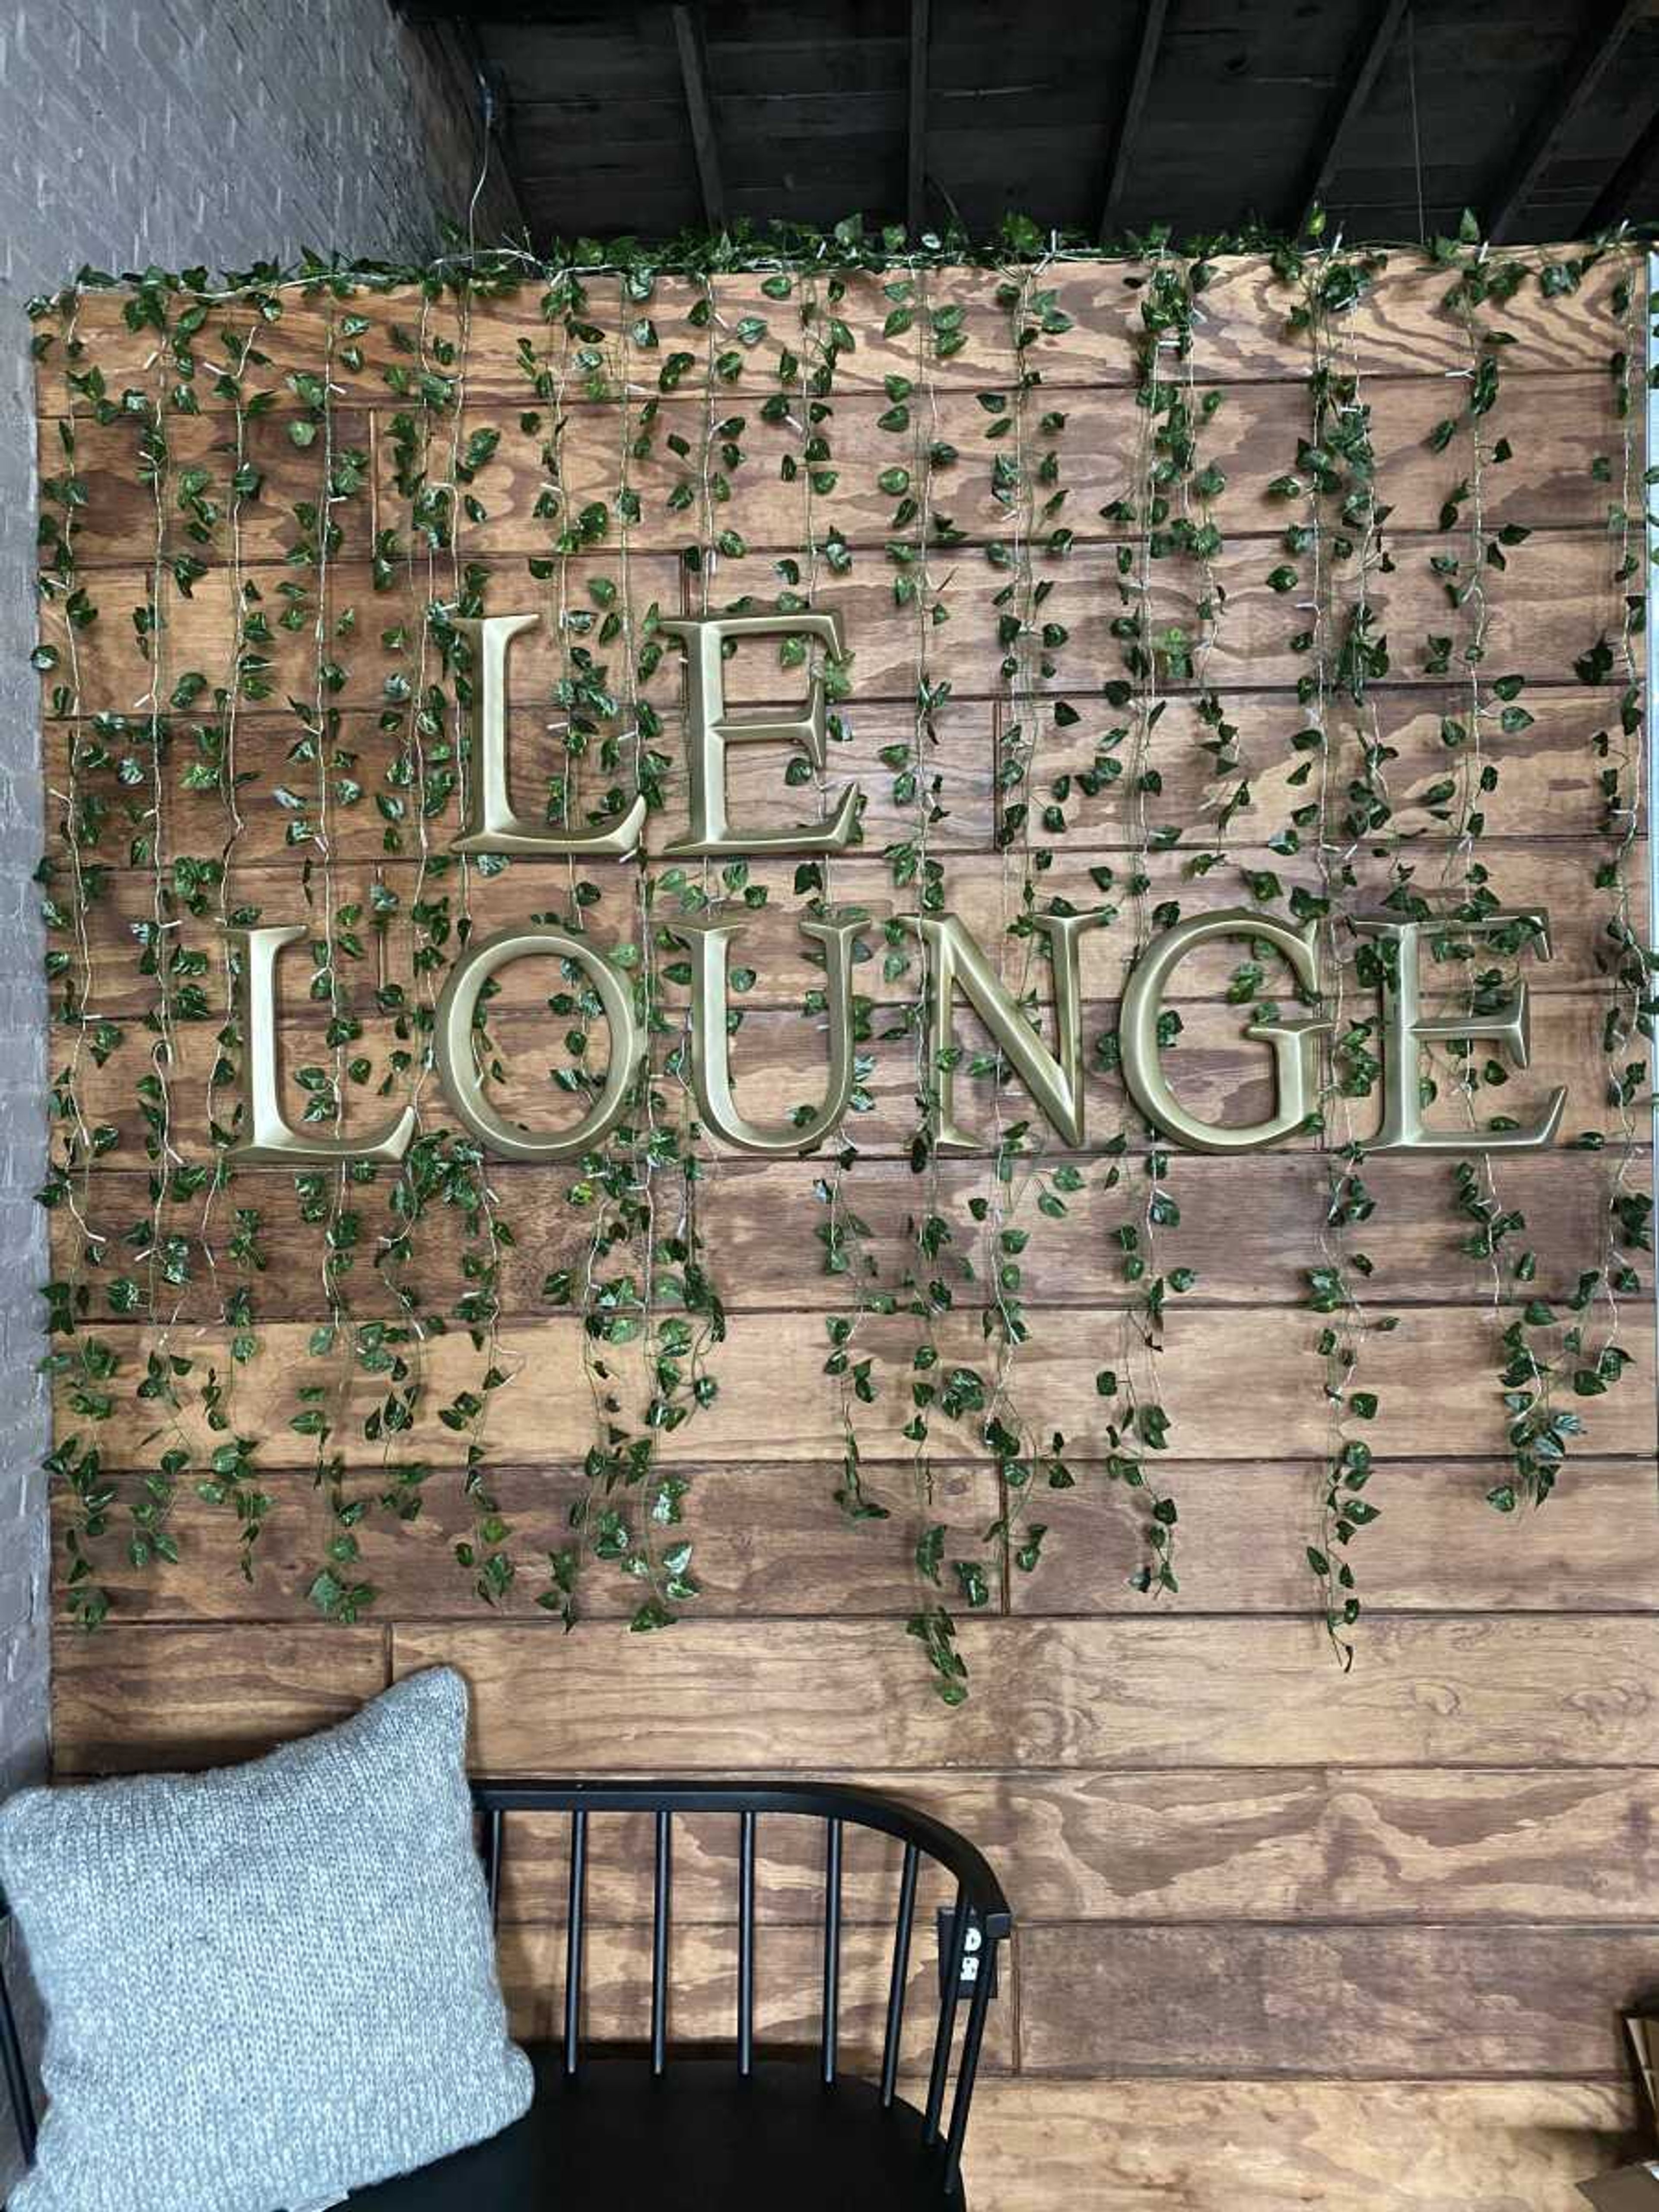 Le Lounge opening in downtown Cape, to include live music and bar